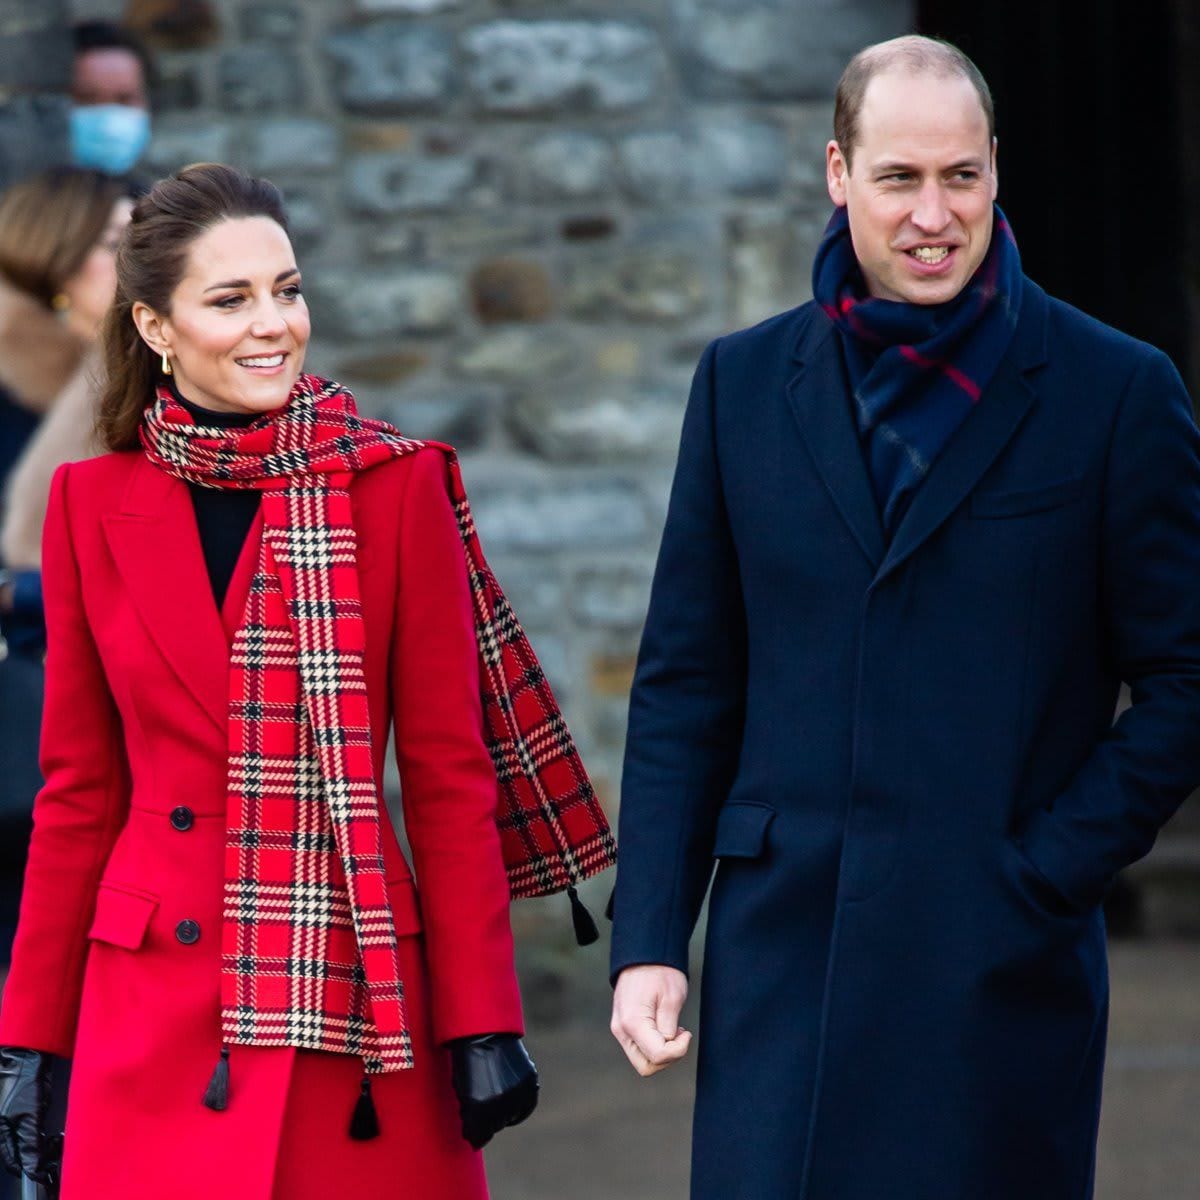 The Duke and Duchess of Cambridge visited Cardiff on Dec. 8